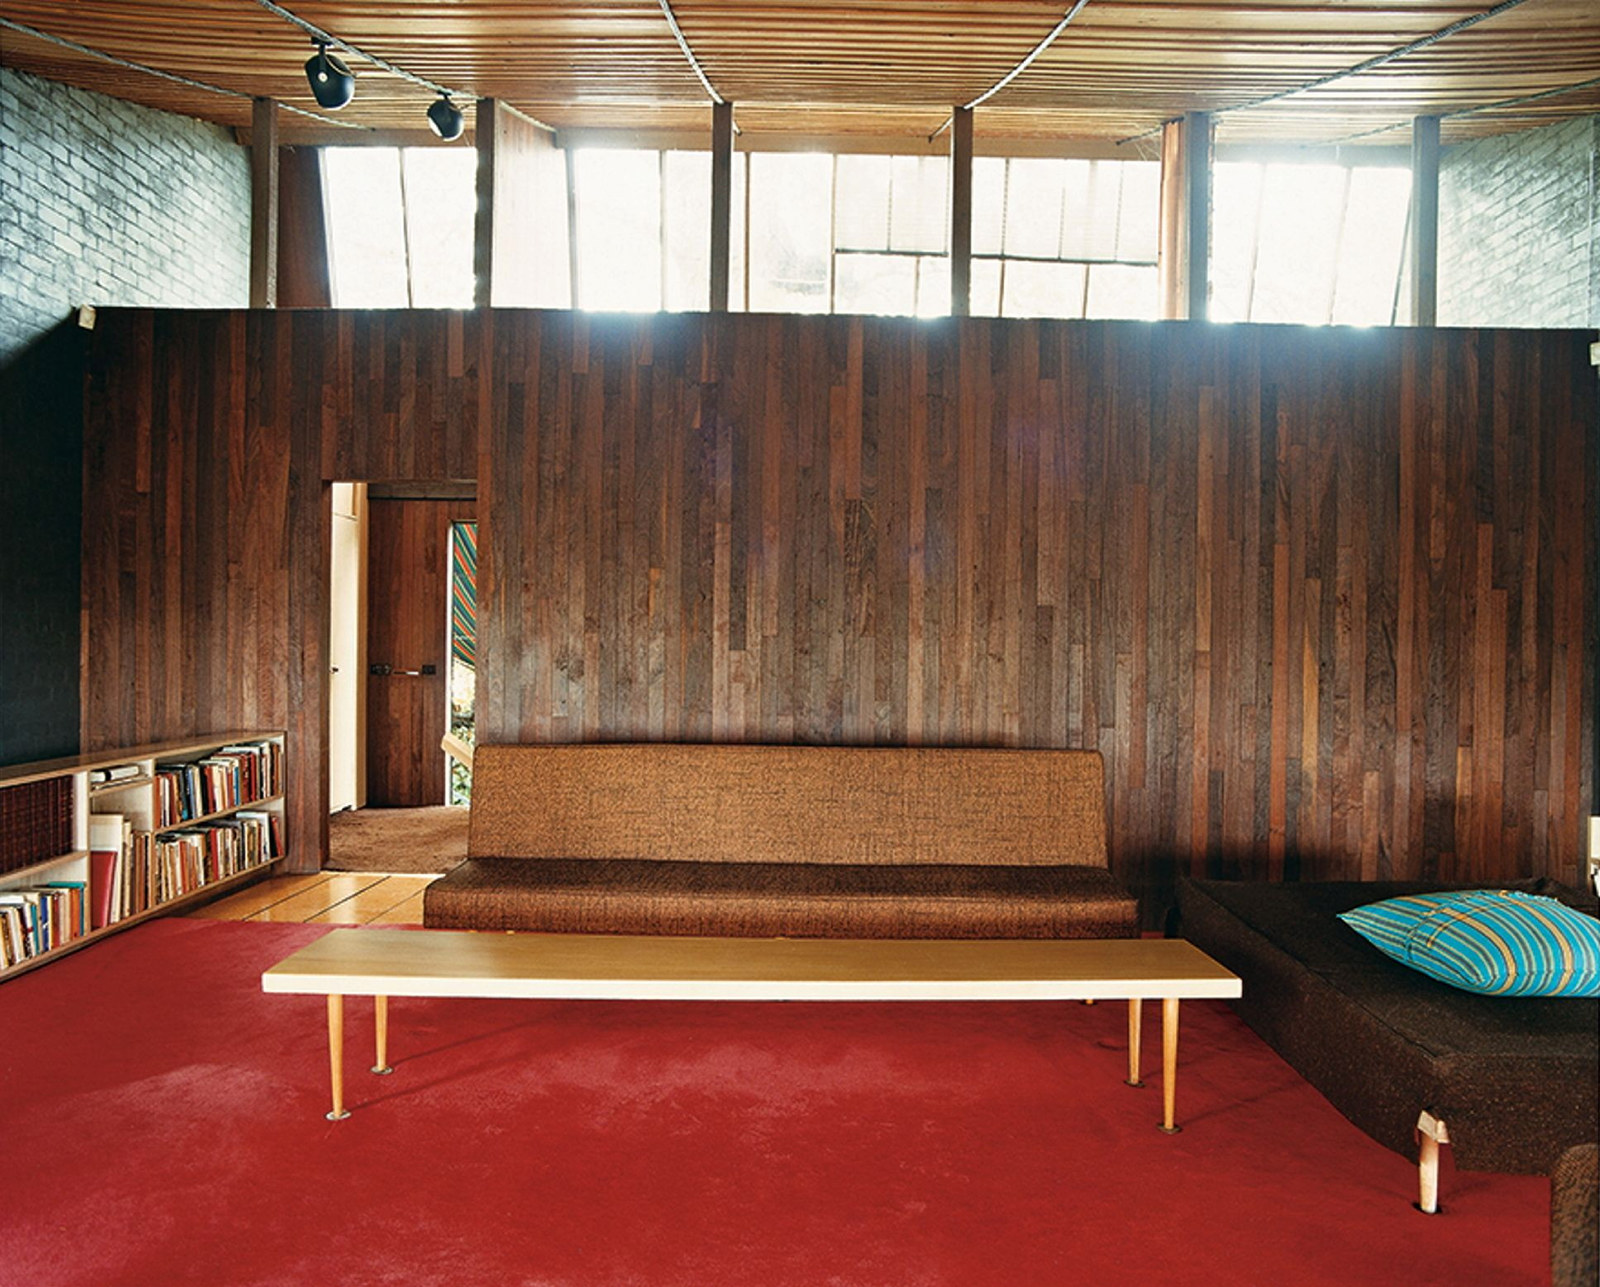 This is a colour photograph of a simple 1950s style sofa with a low timber coffee table in front with a deep red carpet floor and timber wall behind